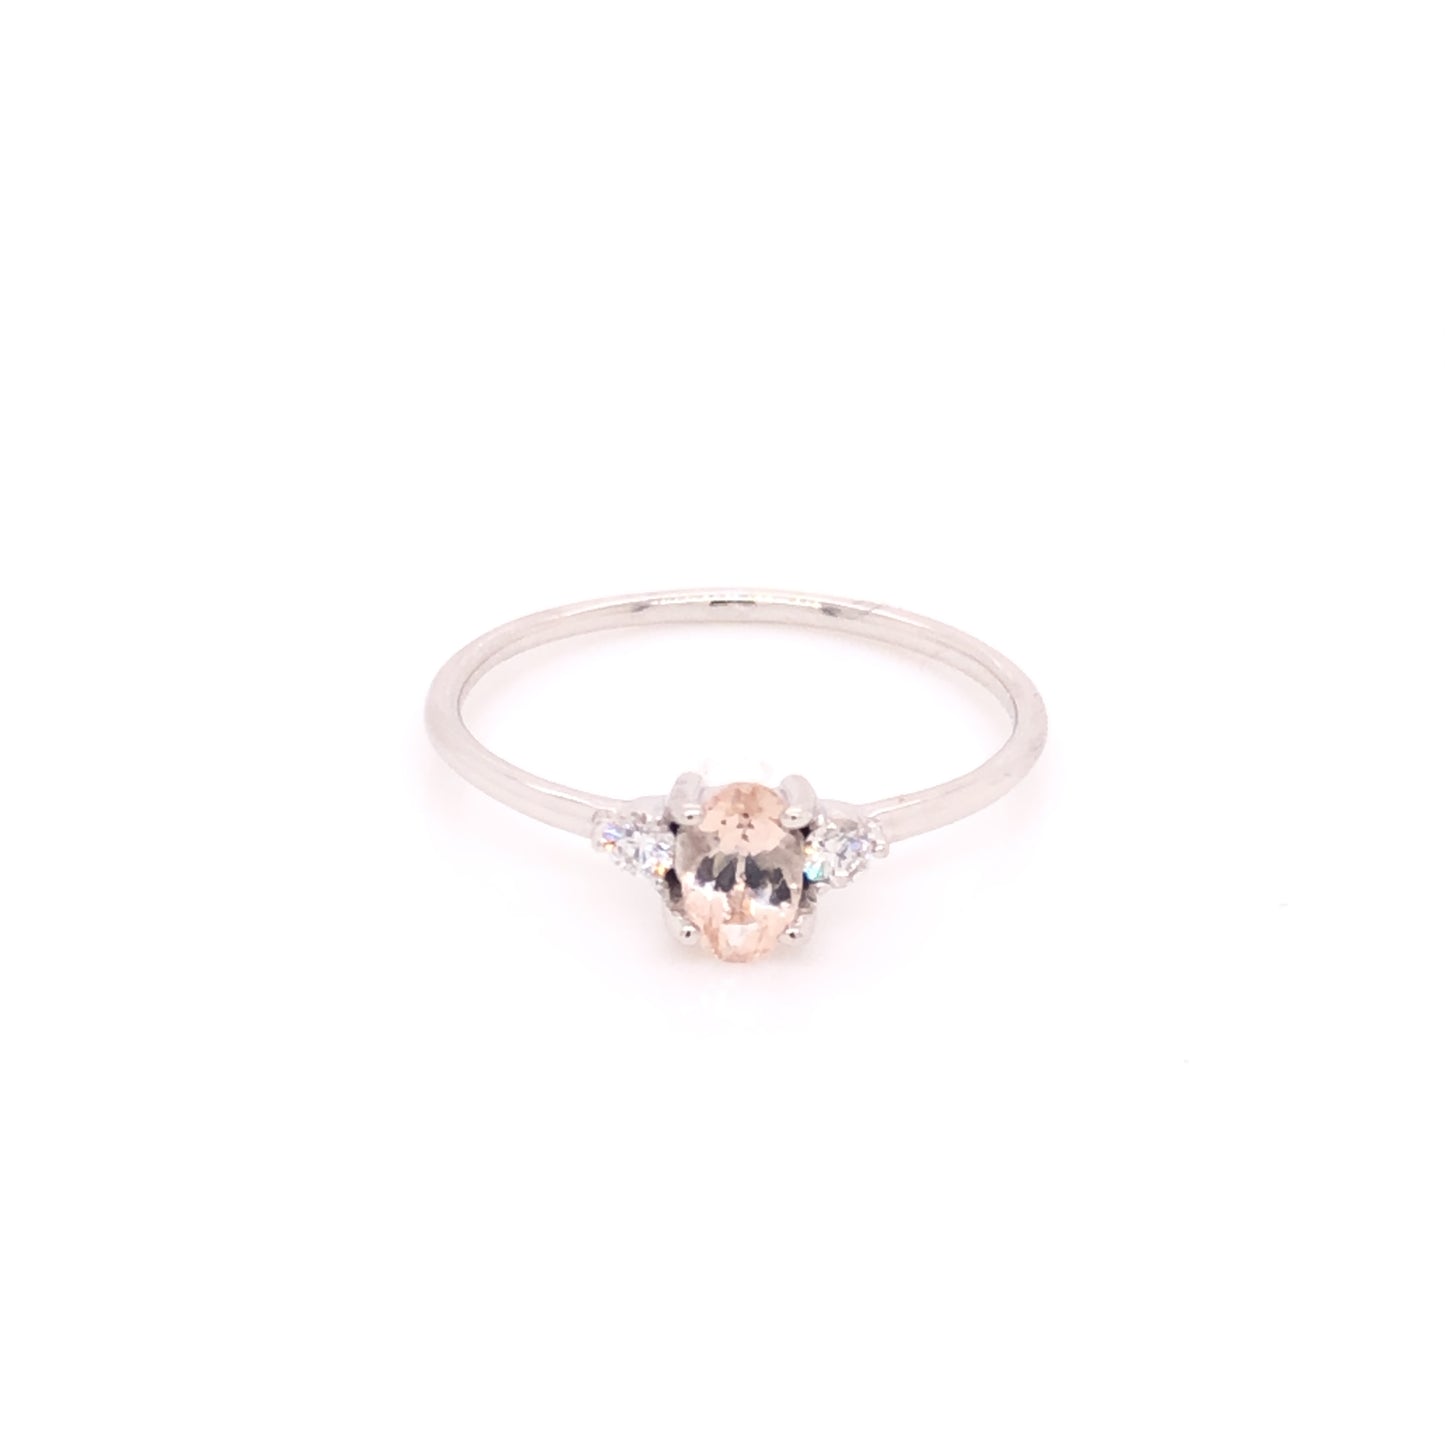 IMMEDIATE DELIVERY / Angie Ring with Morganite / 14k White Gold / Size 4.5